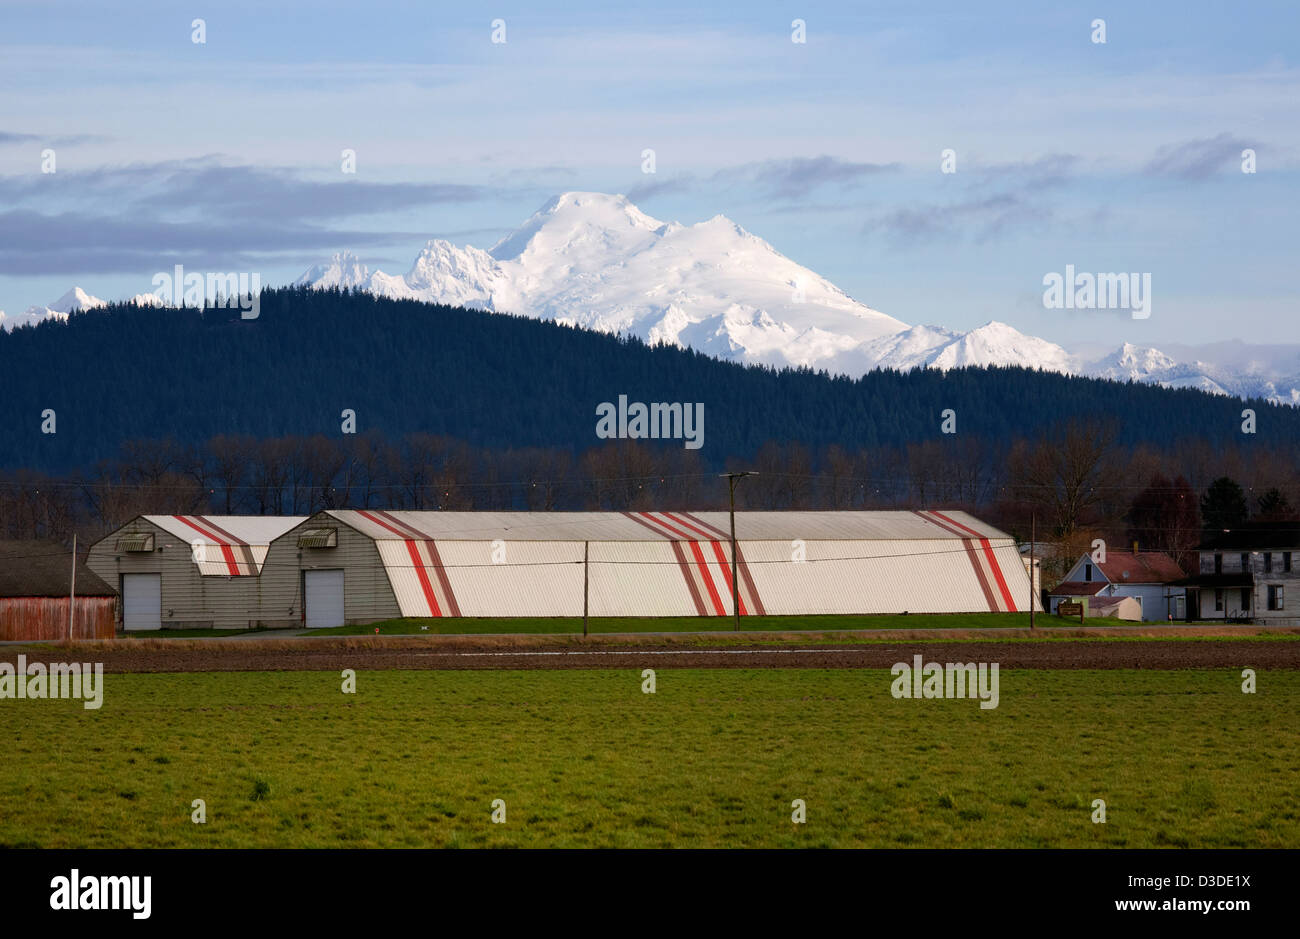 WA08086-00...WASHINGTON - Storage sheds for the farms on Fir Island in the Skagit River Delta with Mount Baker in the distance. Stock Photo